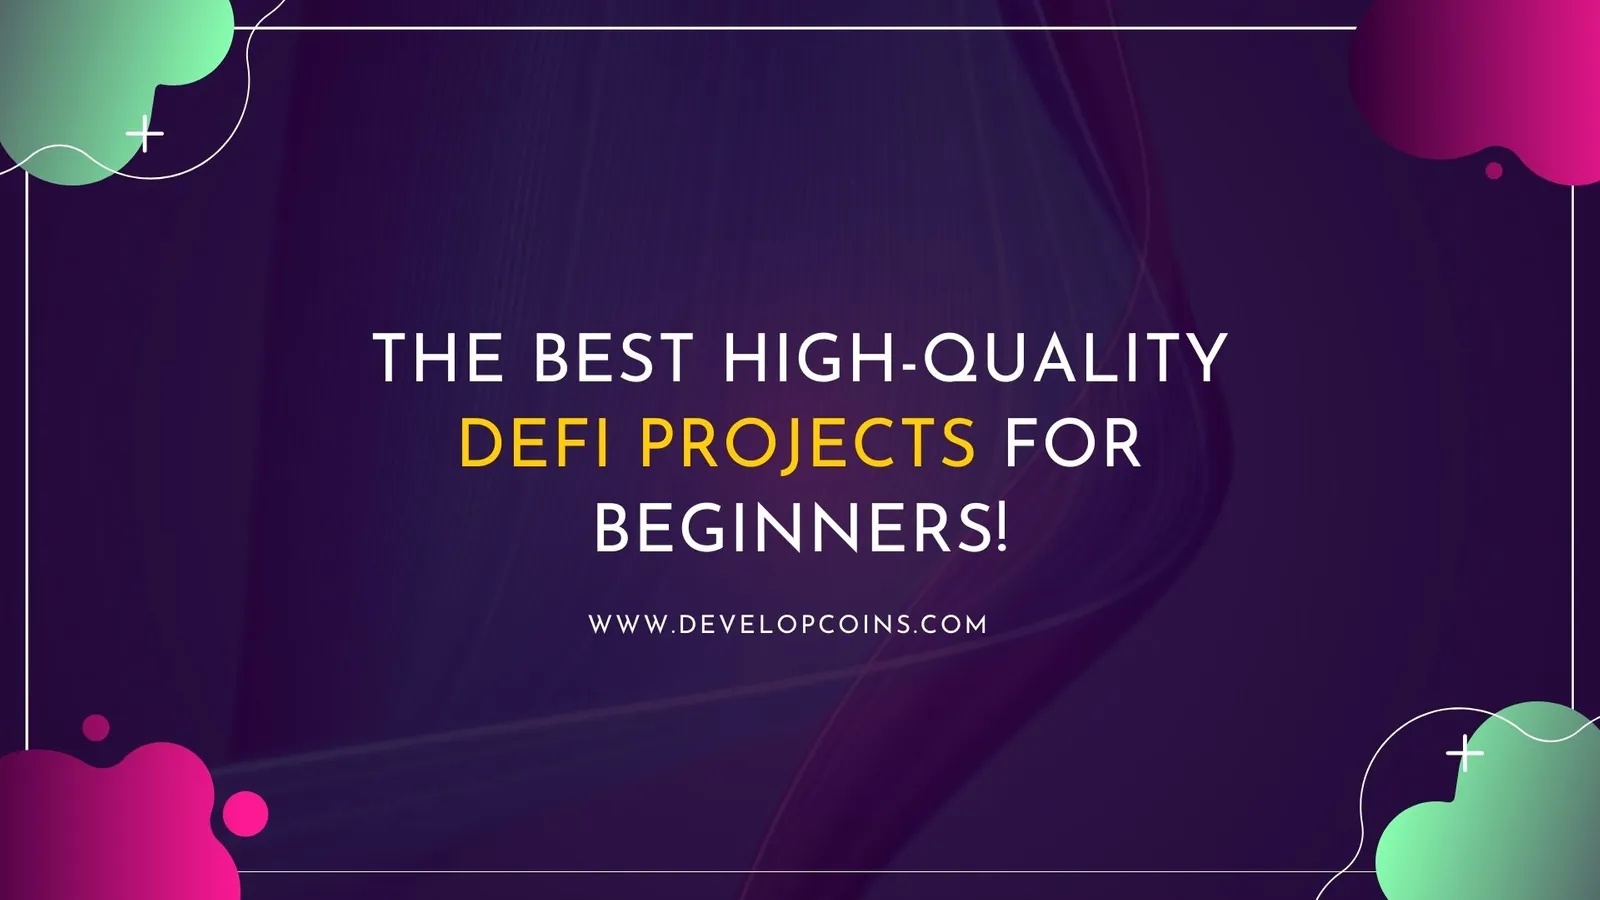 The Best High-Quality DeFi Projects for Beginners!